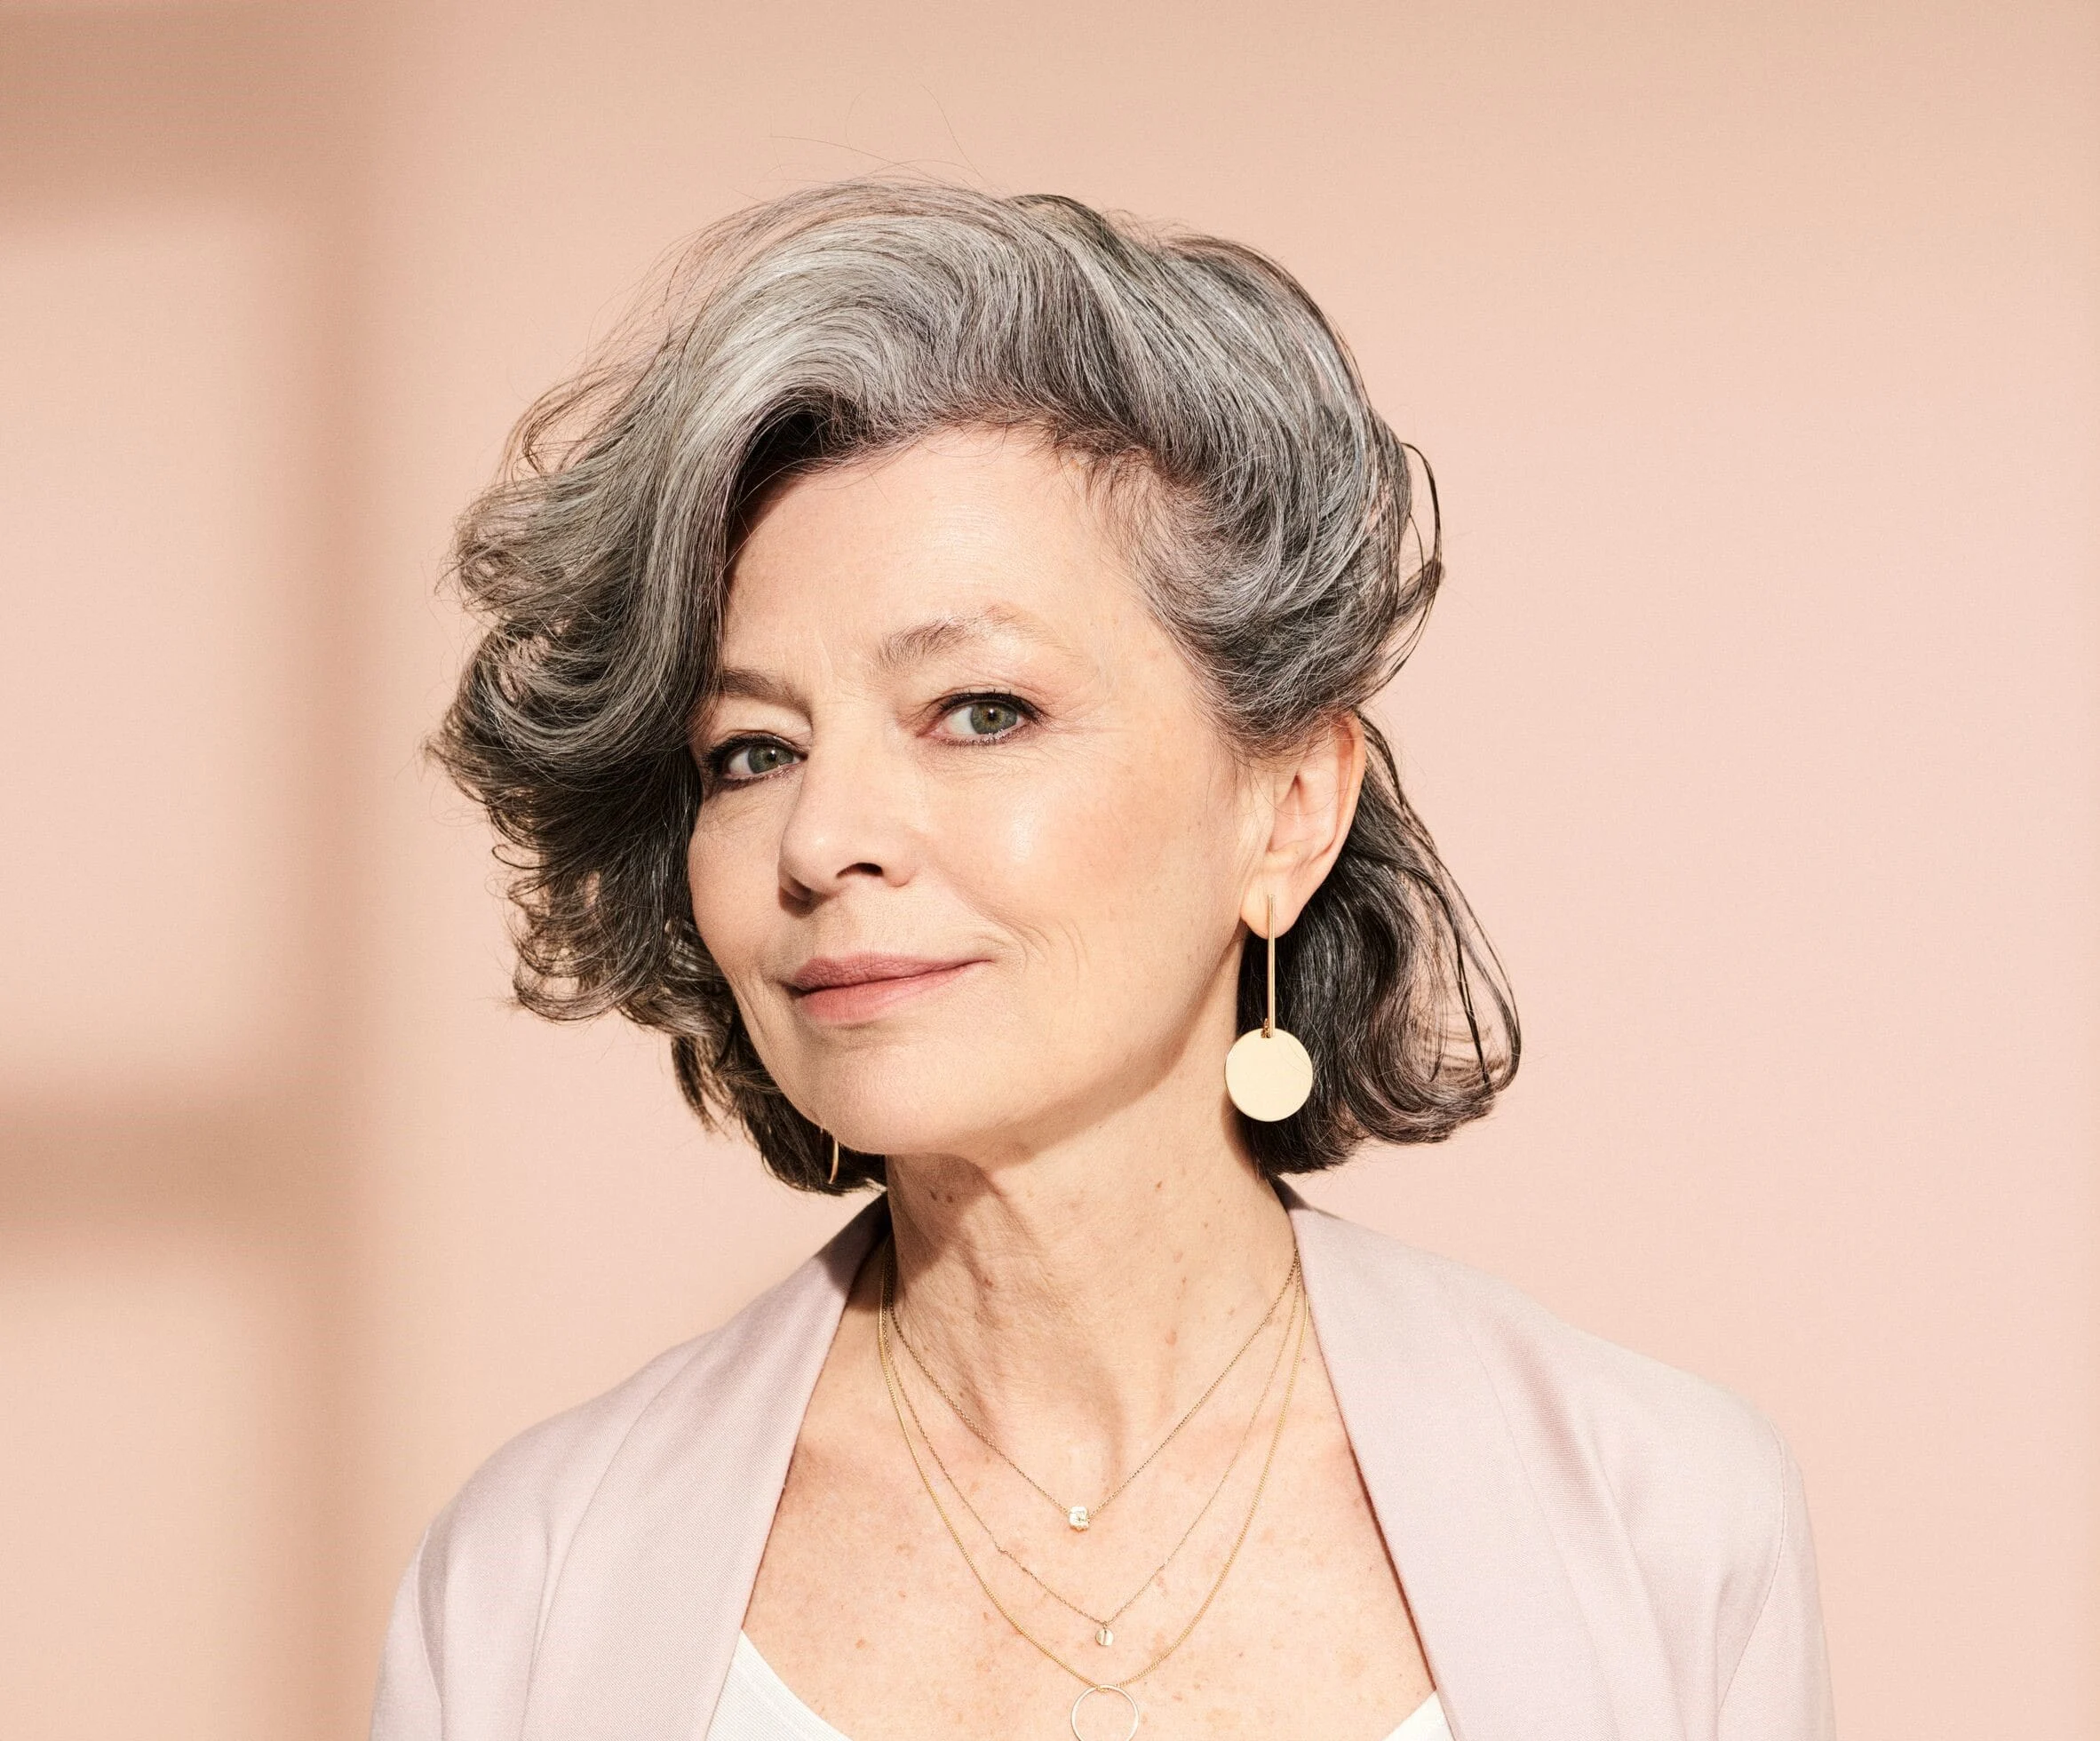 Photo of woman with healthy gray hair